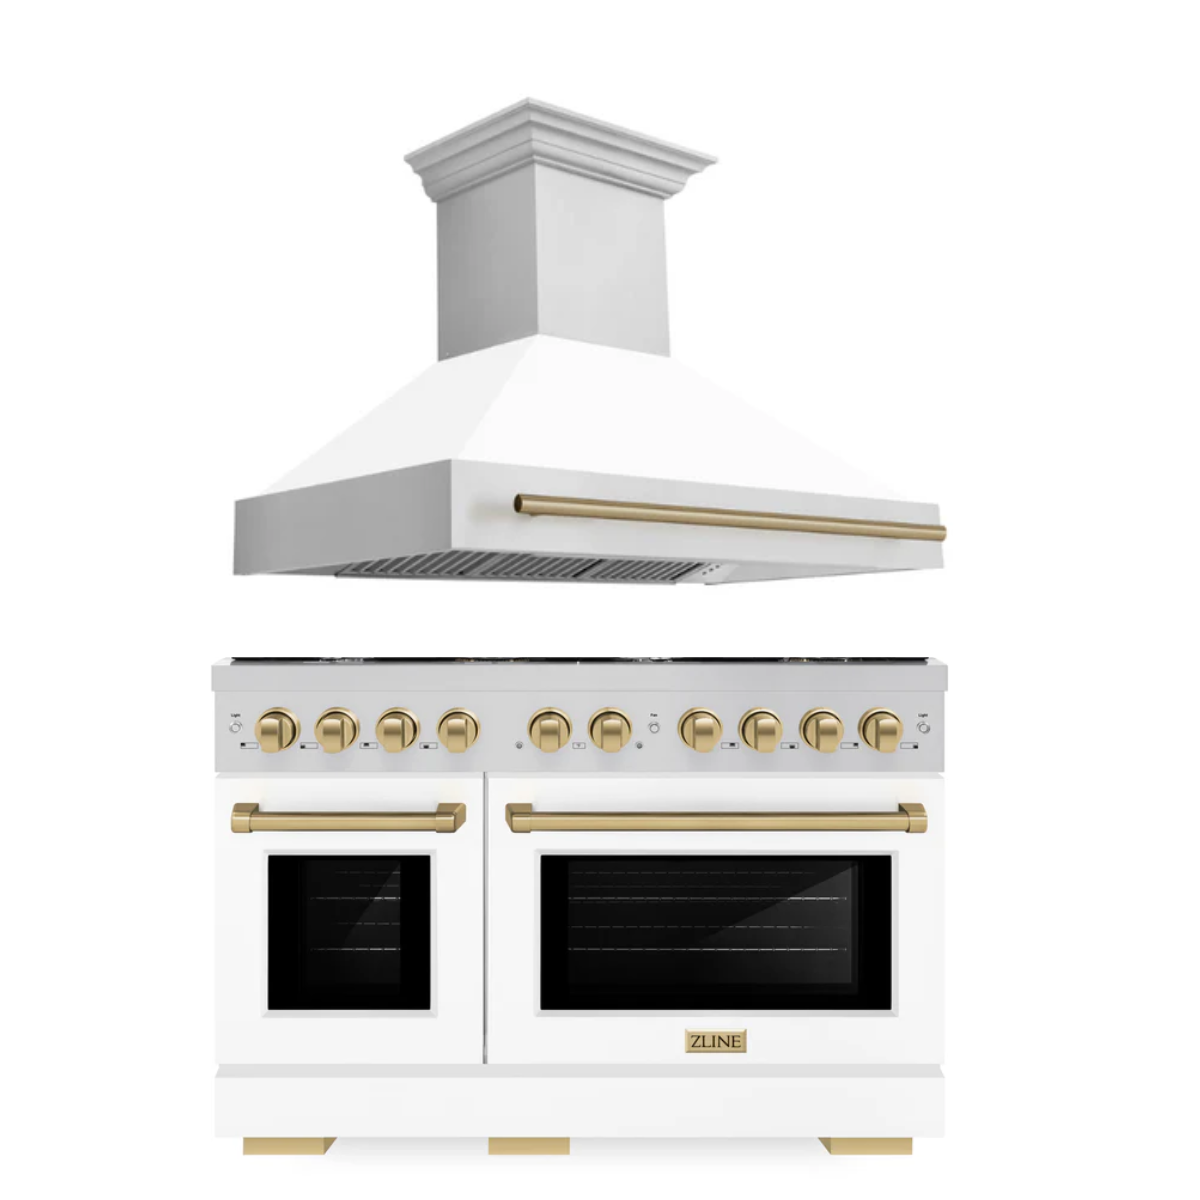 ZLINE Autograph Package - 48 In. Gas Range and Range Hood in Stainless Steel with White Matte Door and Champagne Bronze Accents, 2AKPR-RGWMRH48-CB